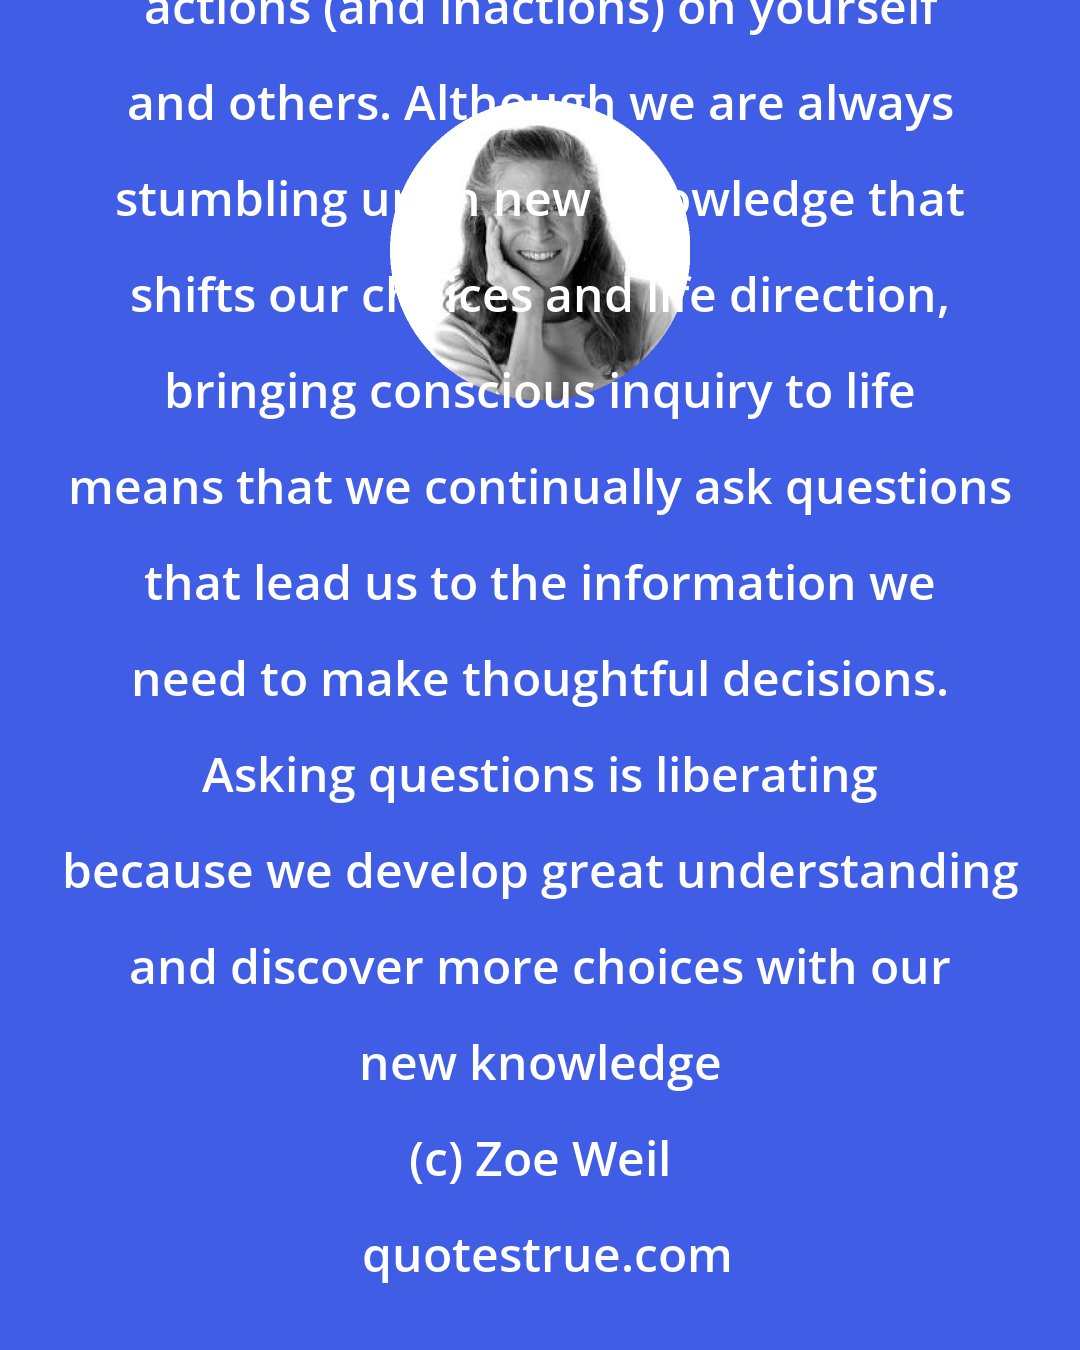 Zoe Weil: In order to align your life choices with your values, you will need to inquire about the effects of your actions (and inactions) on yourself and others. Although we are always stumbling upon new knowledge that shifts our choices and life direction, bringing conscious inquiry to life means that we continually ask questions that lead us to the information we need to make thoughtful decisions. Asking questions is liberating because we develop great understanding and discover more choices with our new knowledge